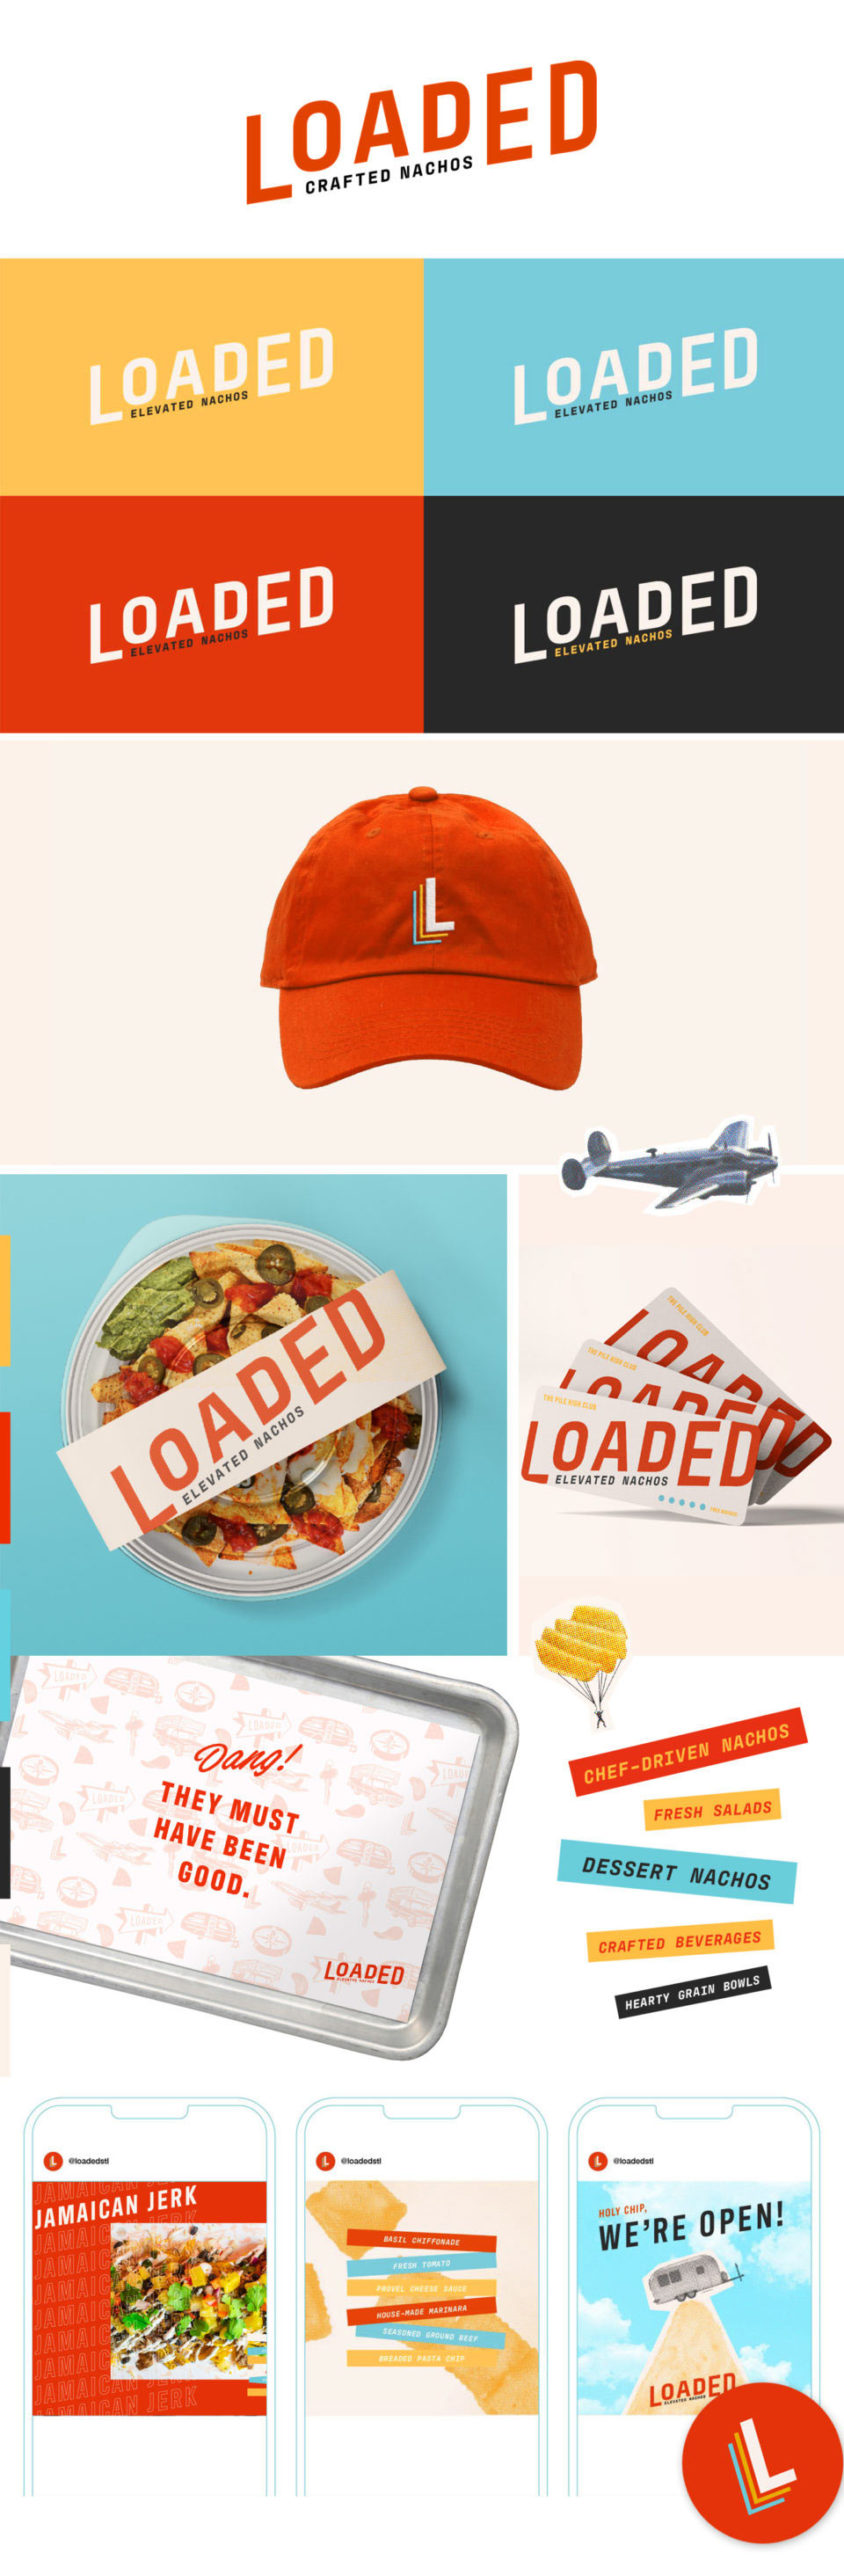 Creative expressions for Loaded's fast casual branding including